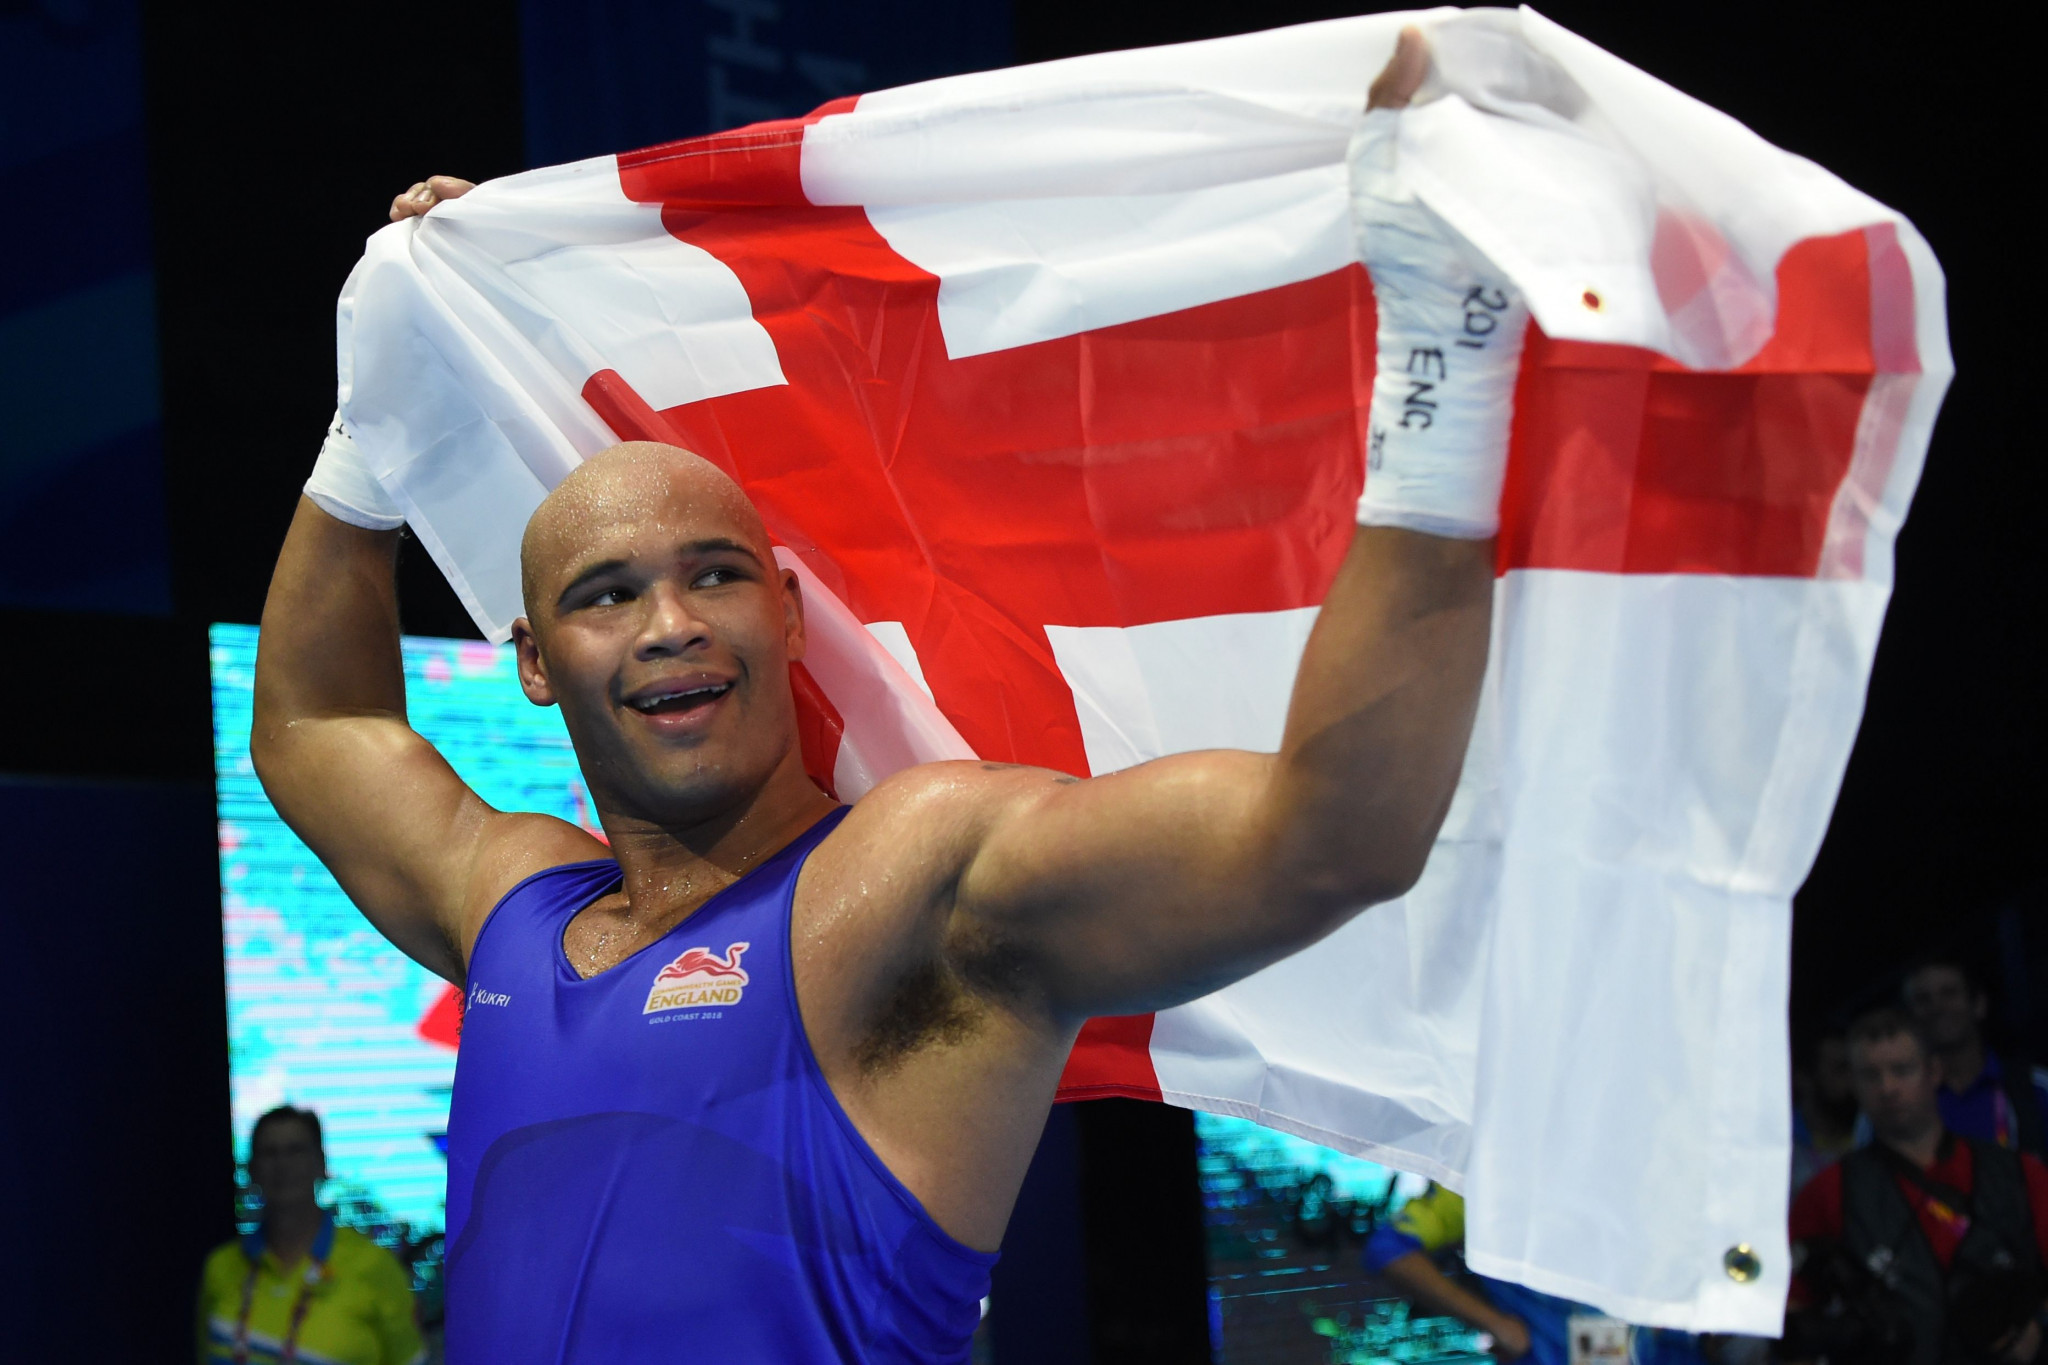 Frazer Clarke was the last of six English boxers to win a gold medal today after coming out on top in the men's over 91 kilograms category ©Getty Images